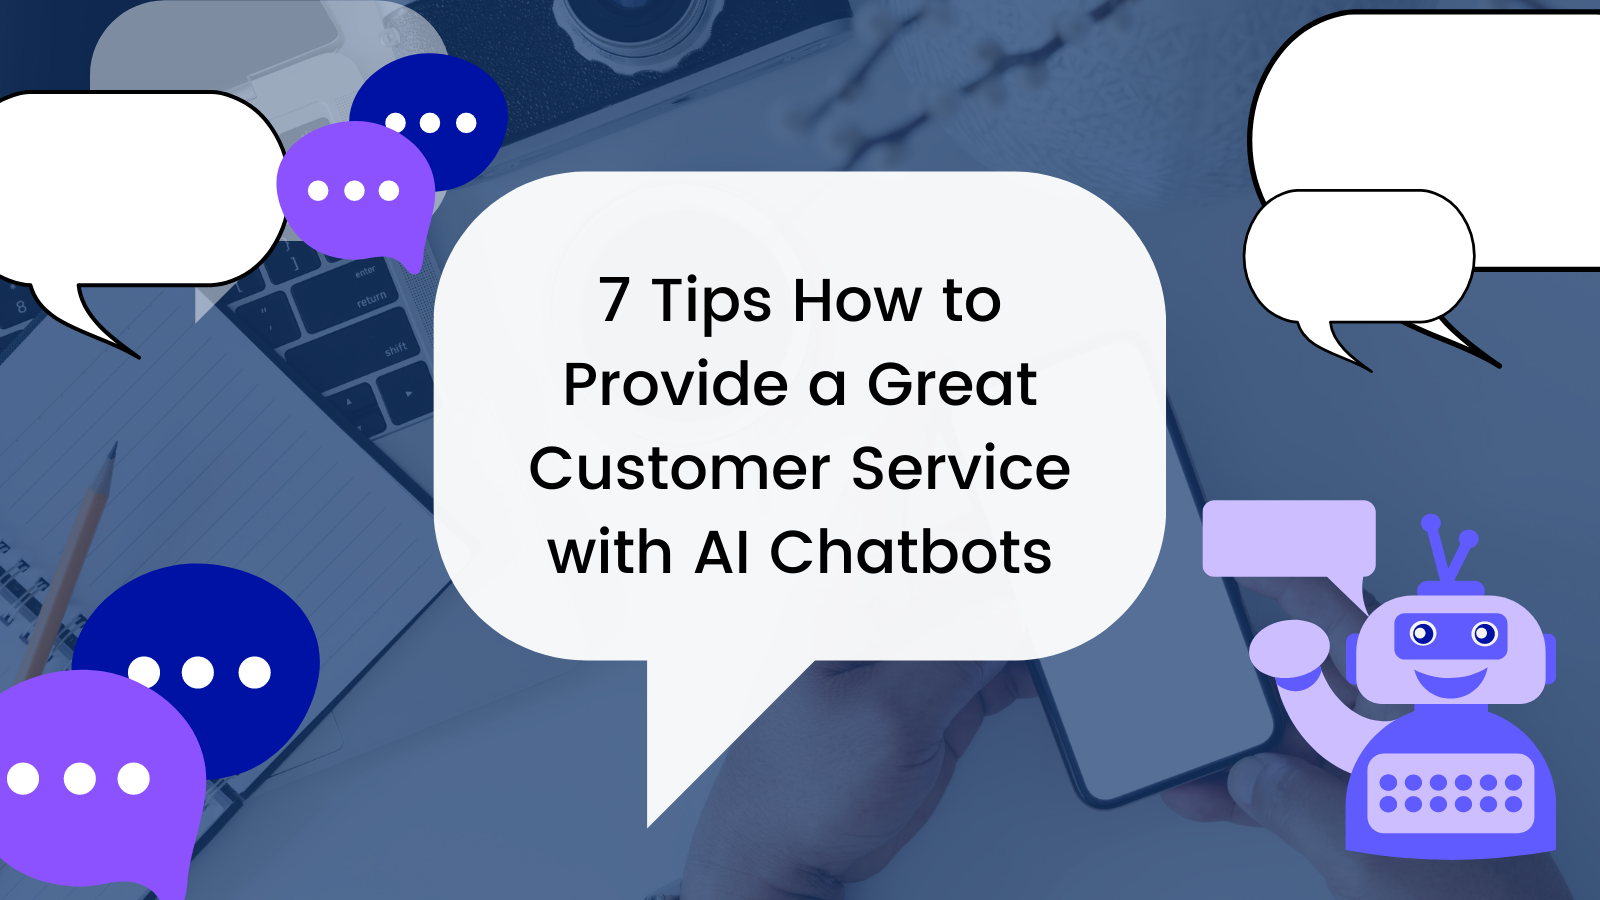 Customer Service with AI Chatbots